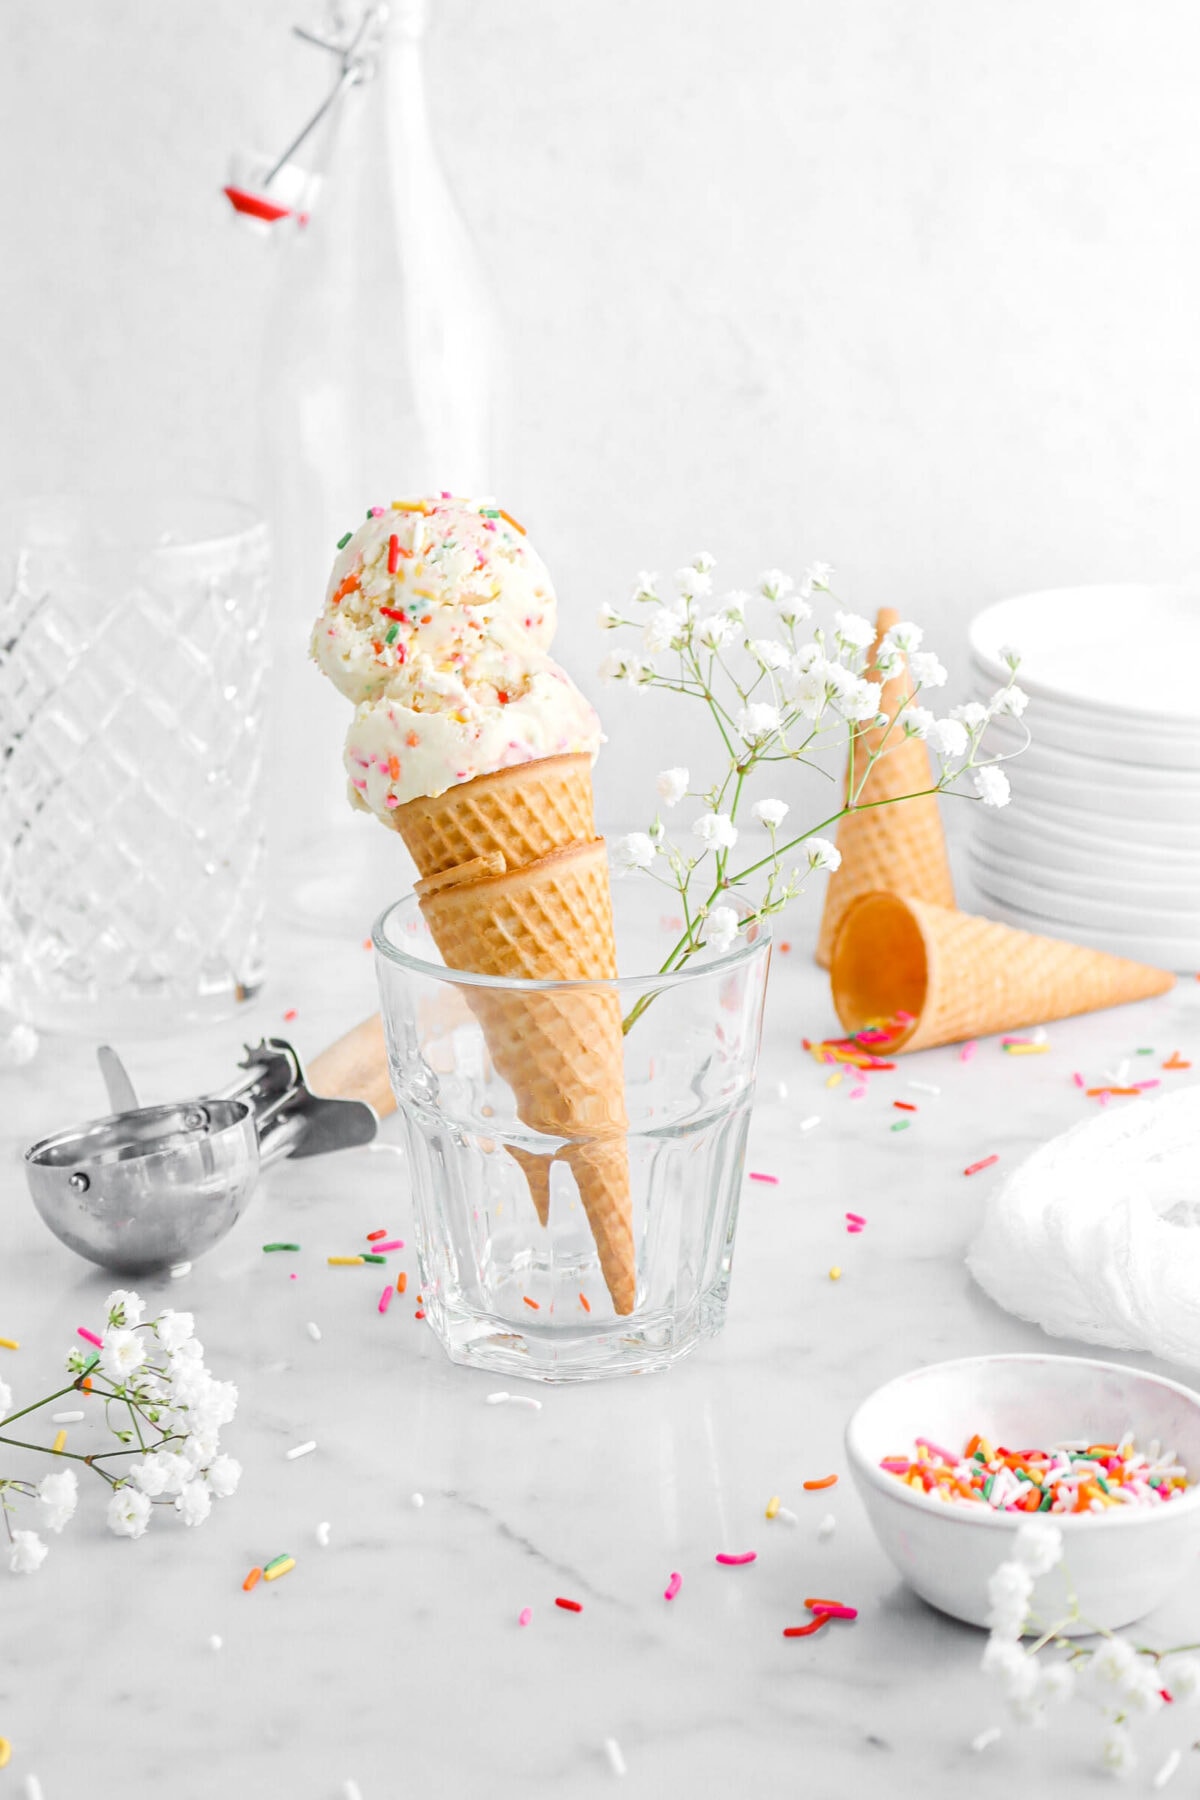 two scoops of ice cream in two stacked ice cream cones in small milk glass with stem of white flowers in glass beside, with more white flowers and rainbow sprinkles around on marble surface.